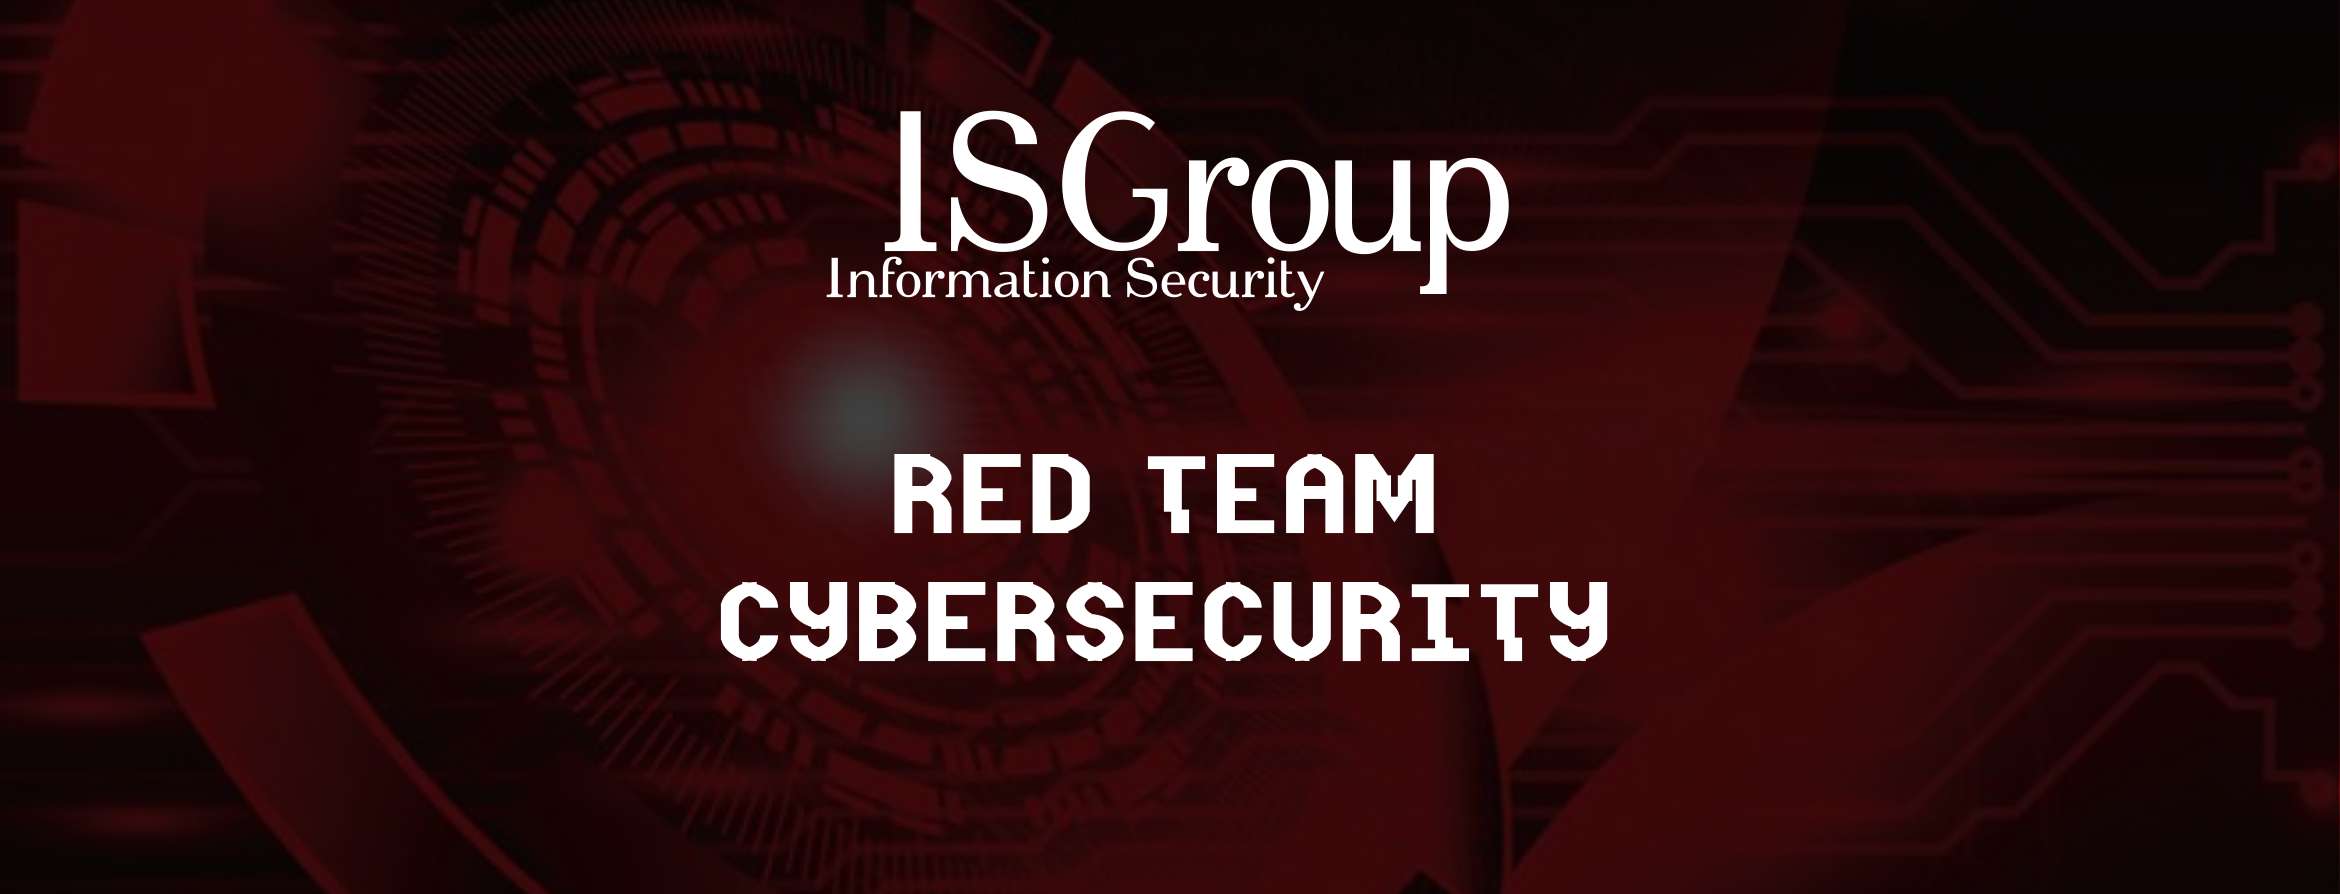 Red Team Cybersecurity